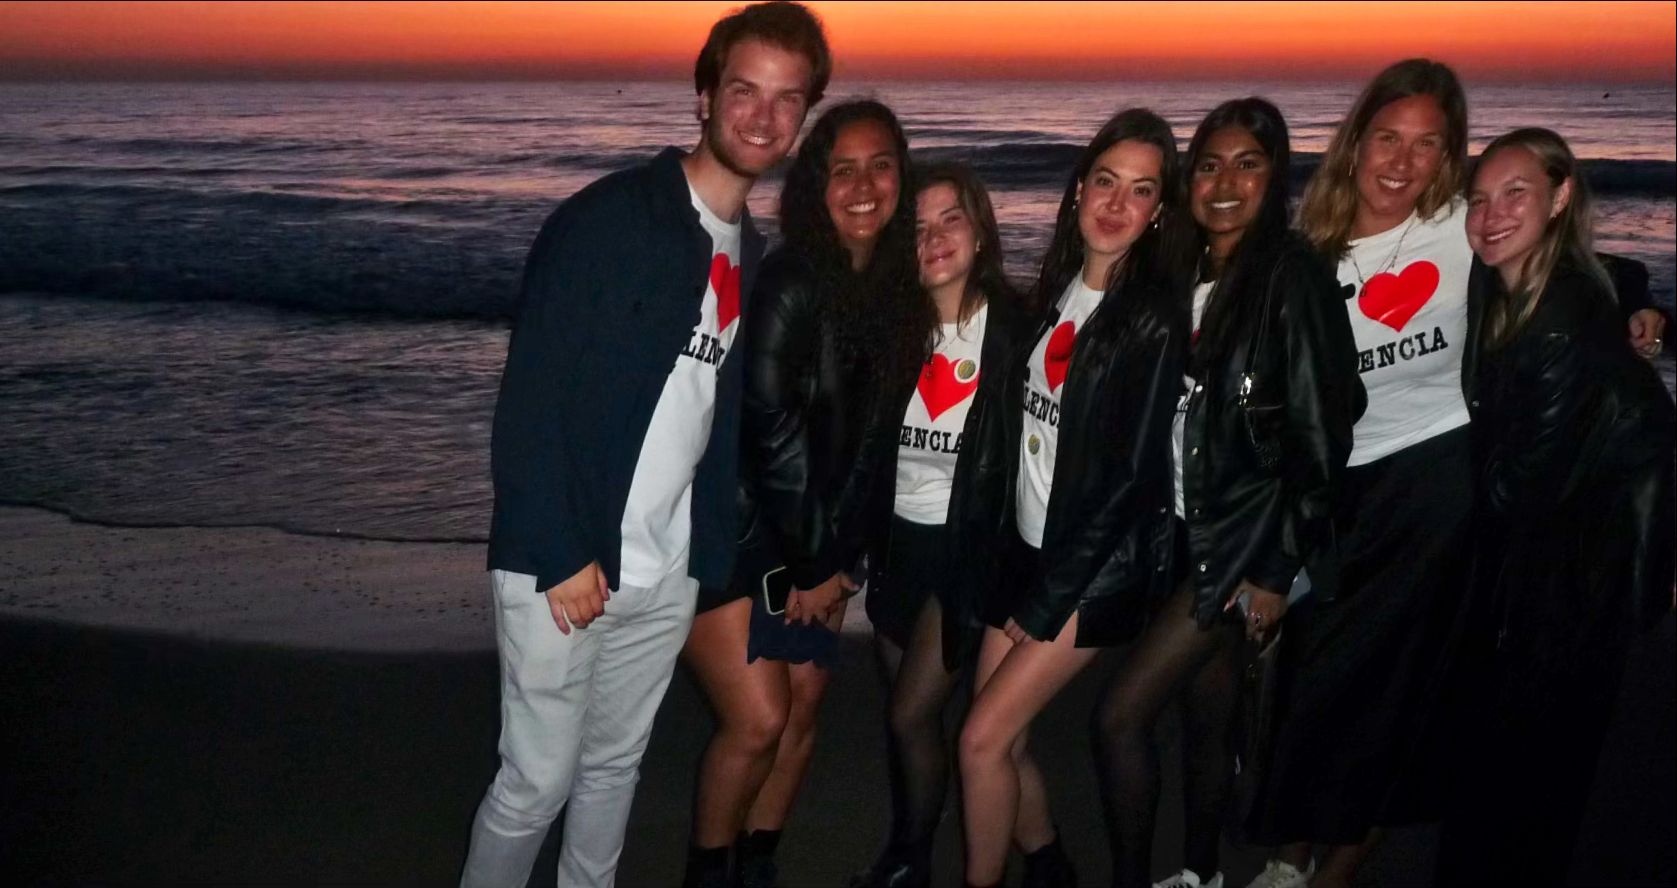 Group of students wearing I Love Valencia shirts on the beach at sunset